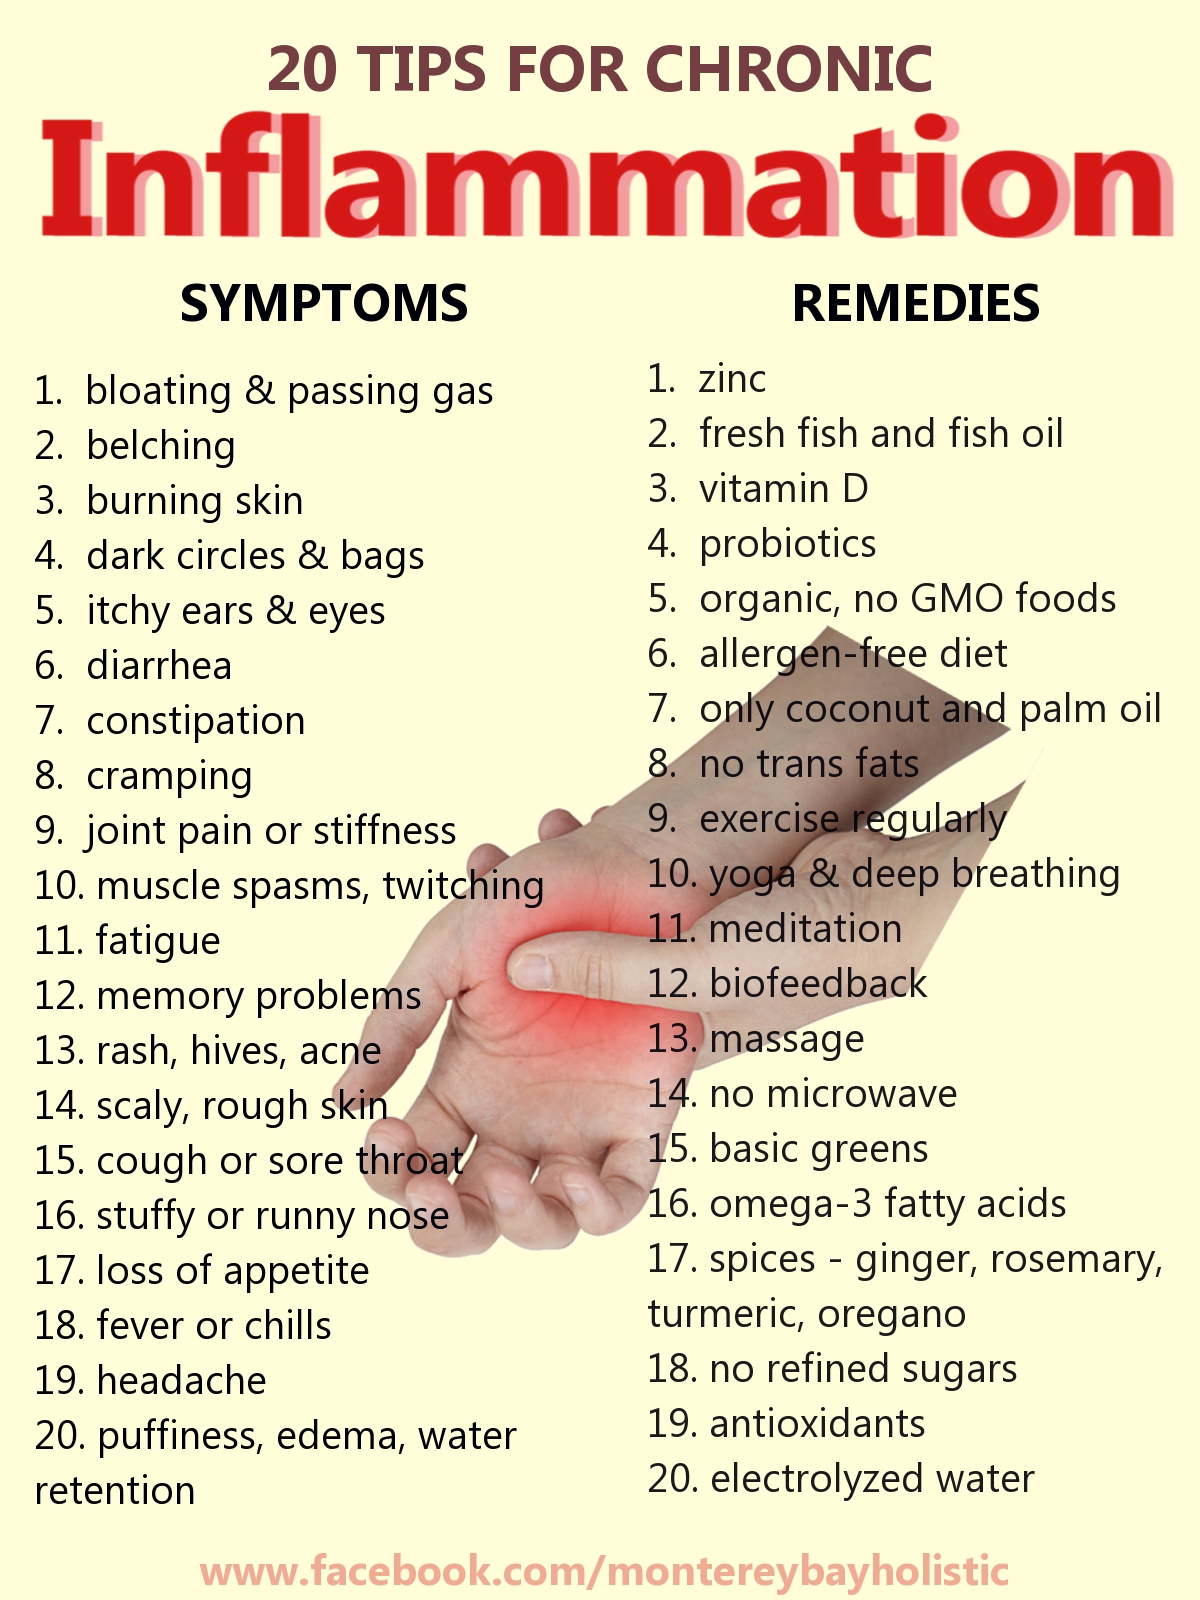 What are some causes of chronic inflammation?